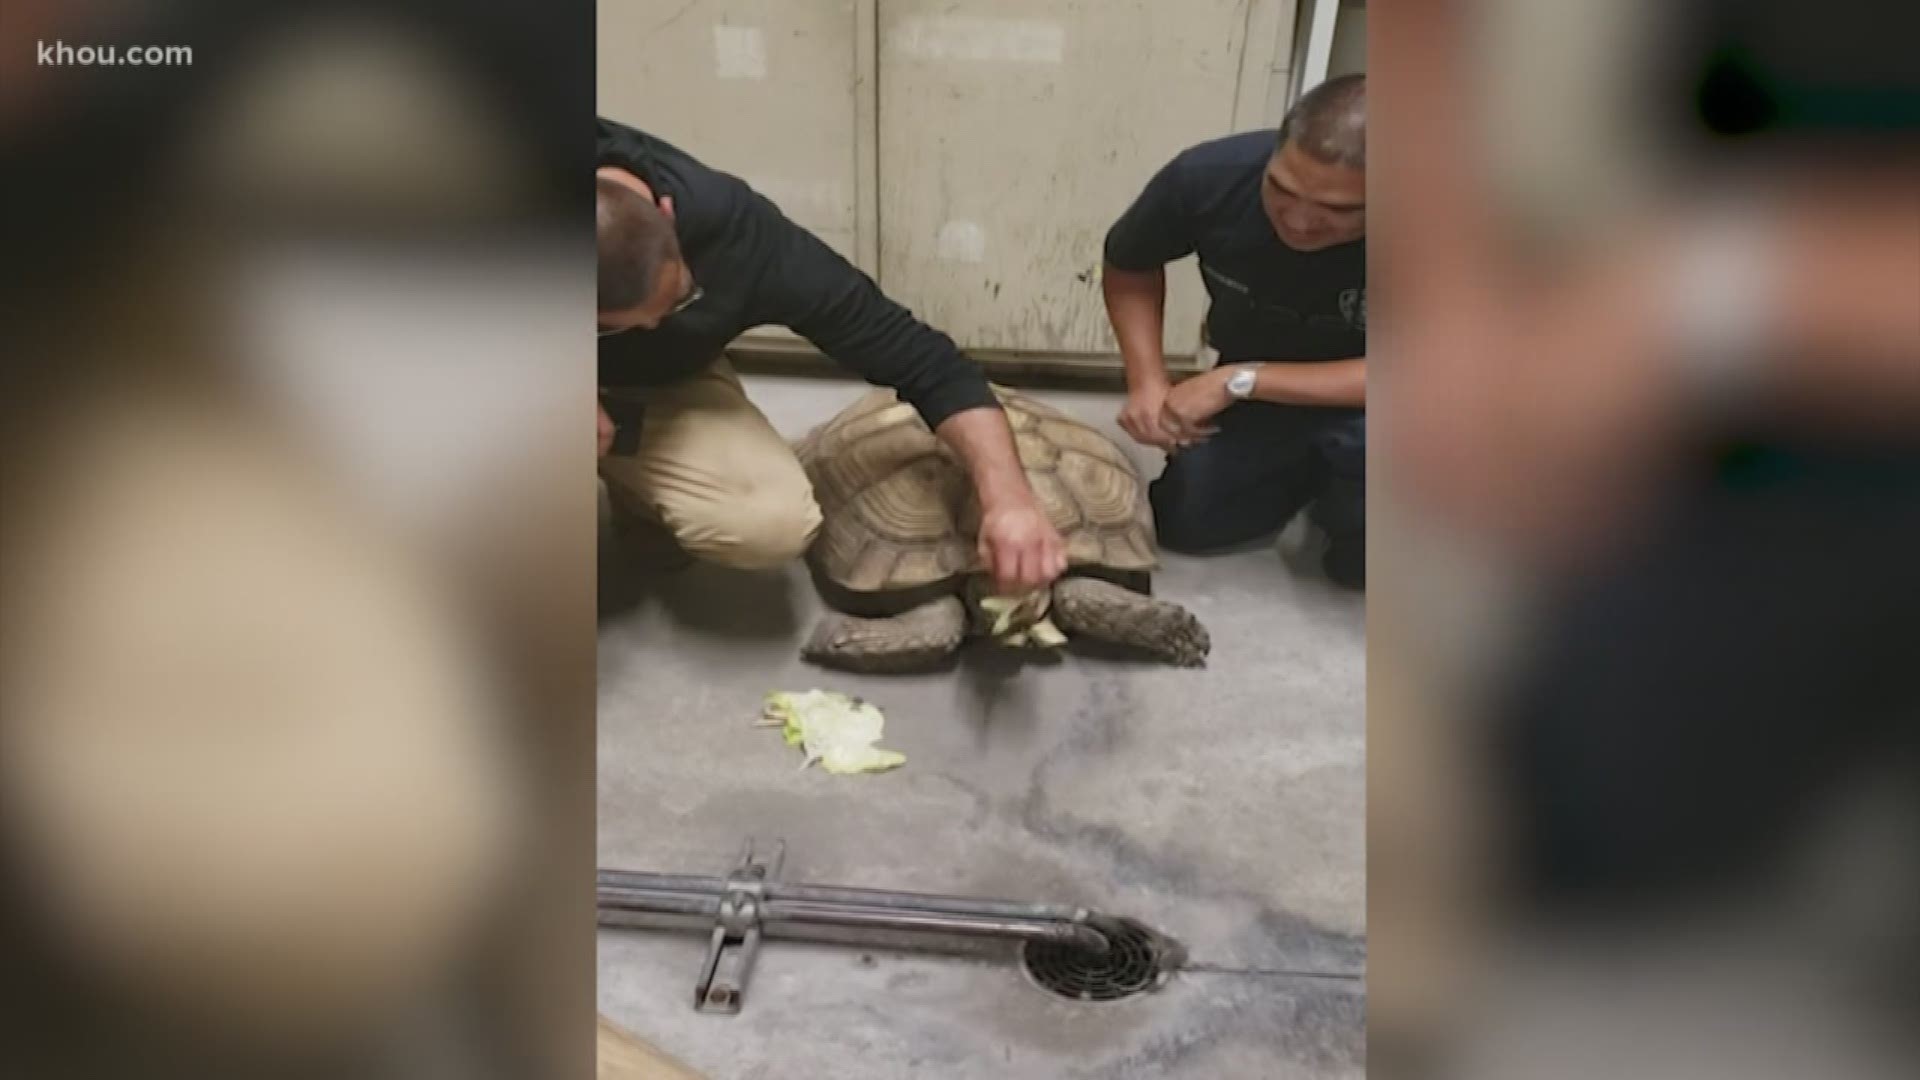 It's not everyday you see a tortoise at a fire station, but that's just what happened Monday at Houston Fire Station 45.